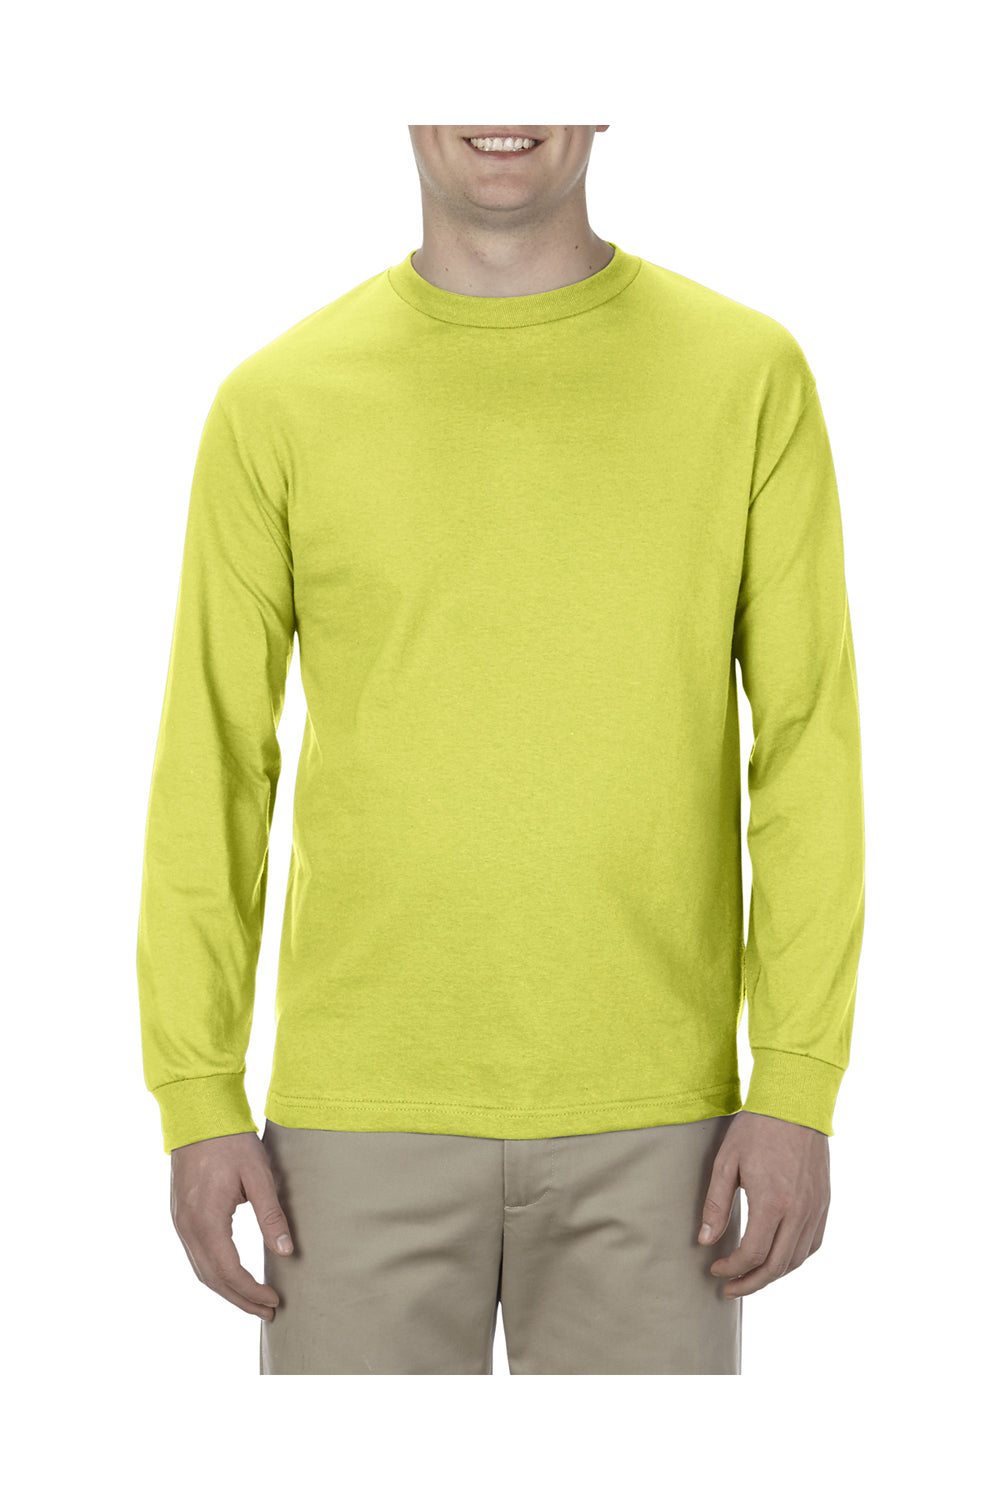 Alstyle AL1304 Mens Long Sleeve Crewneck T-Shirt Safety Green Front